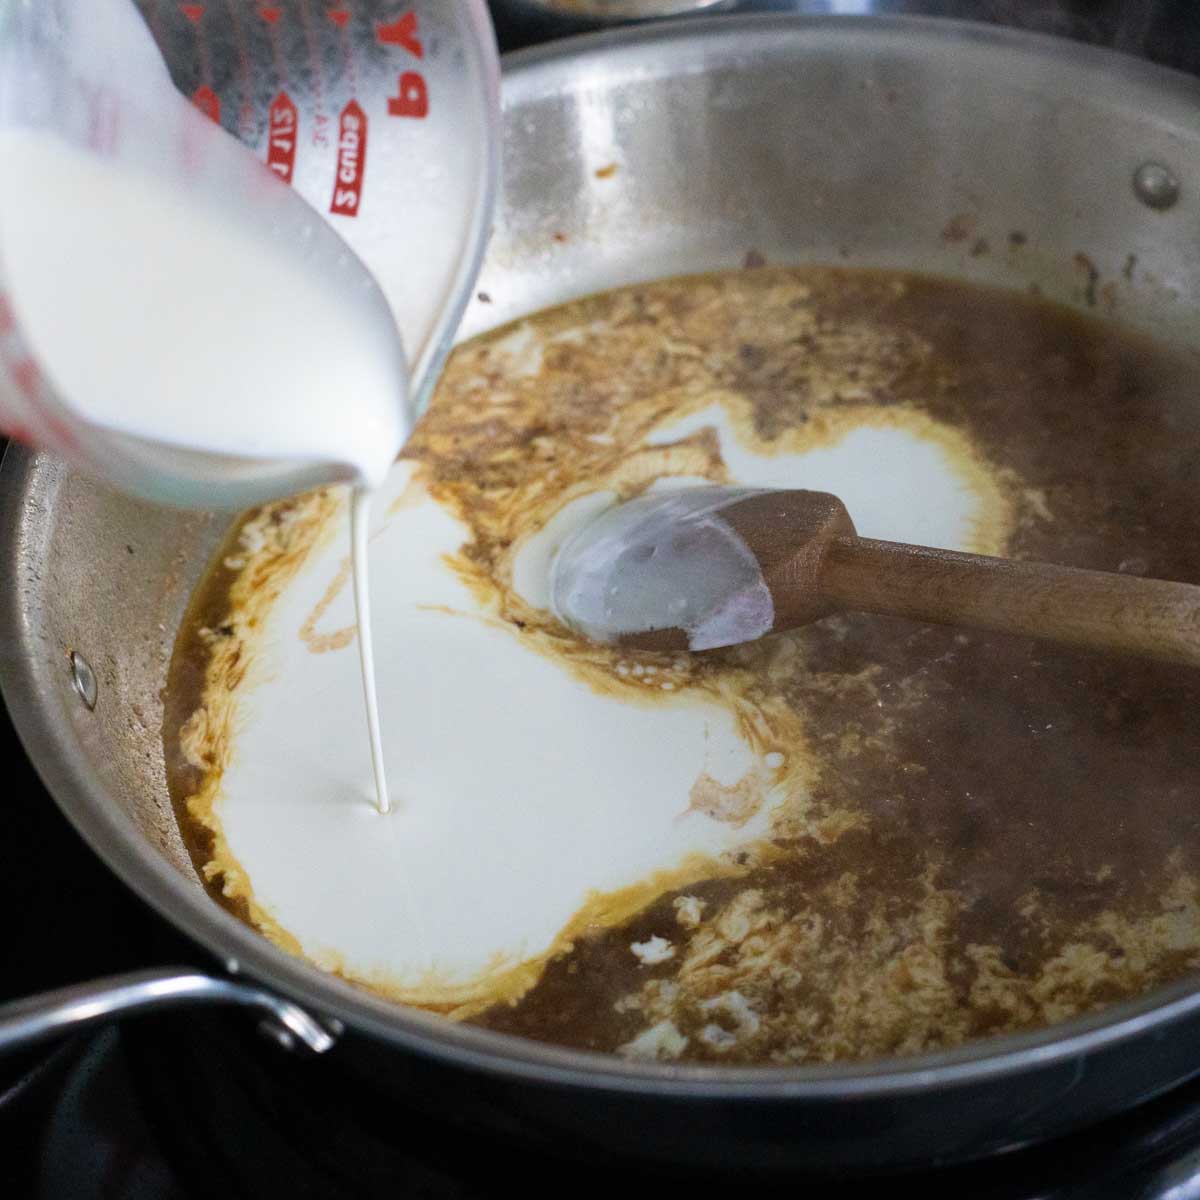 The cream is being poured into the sauce.